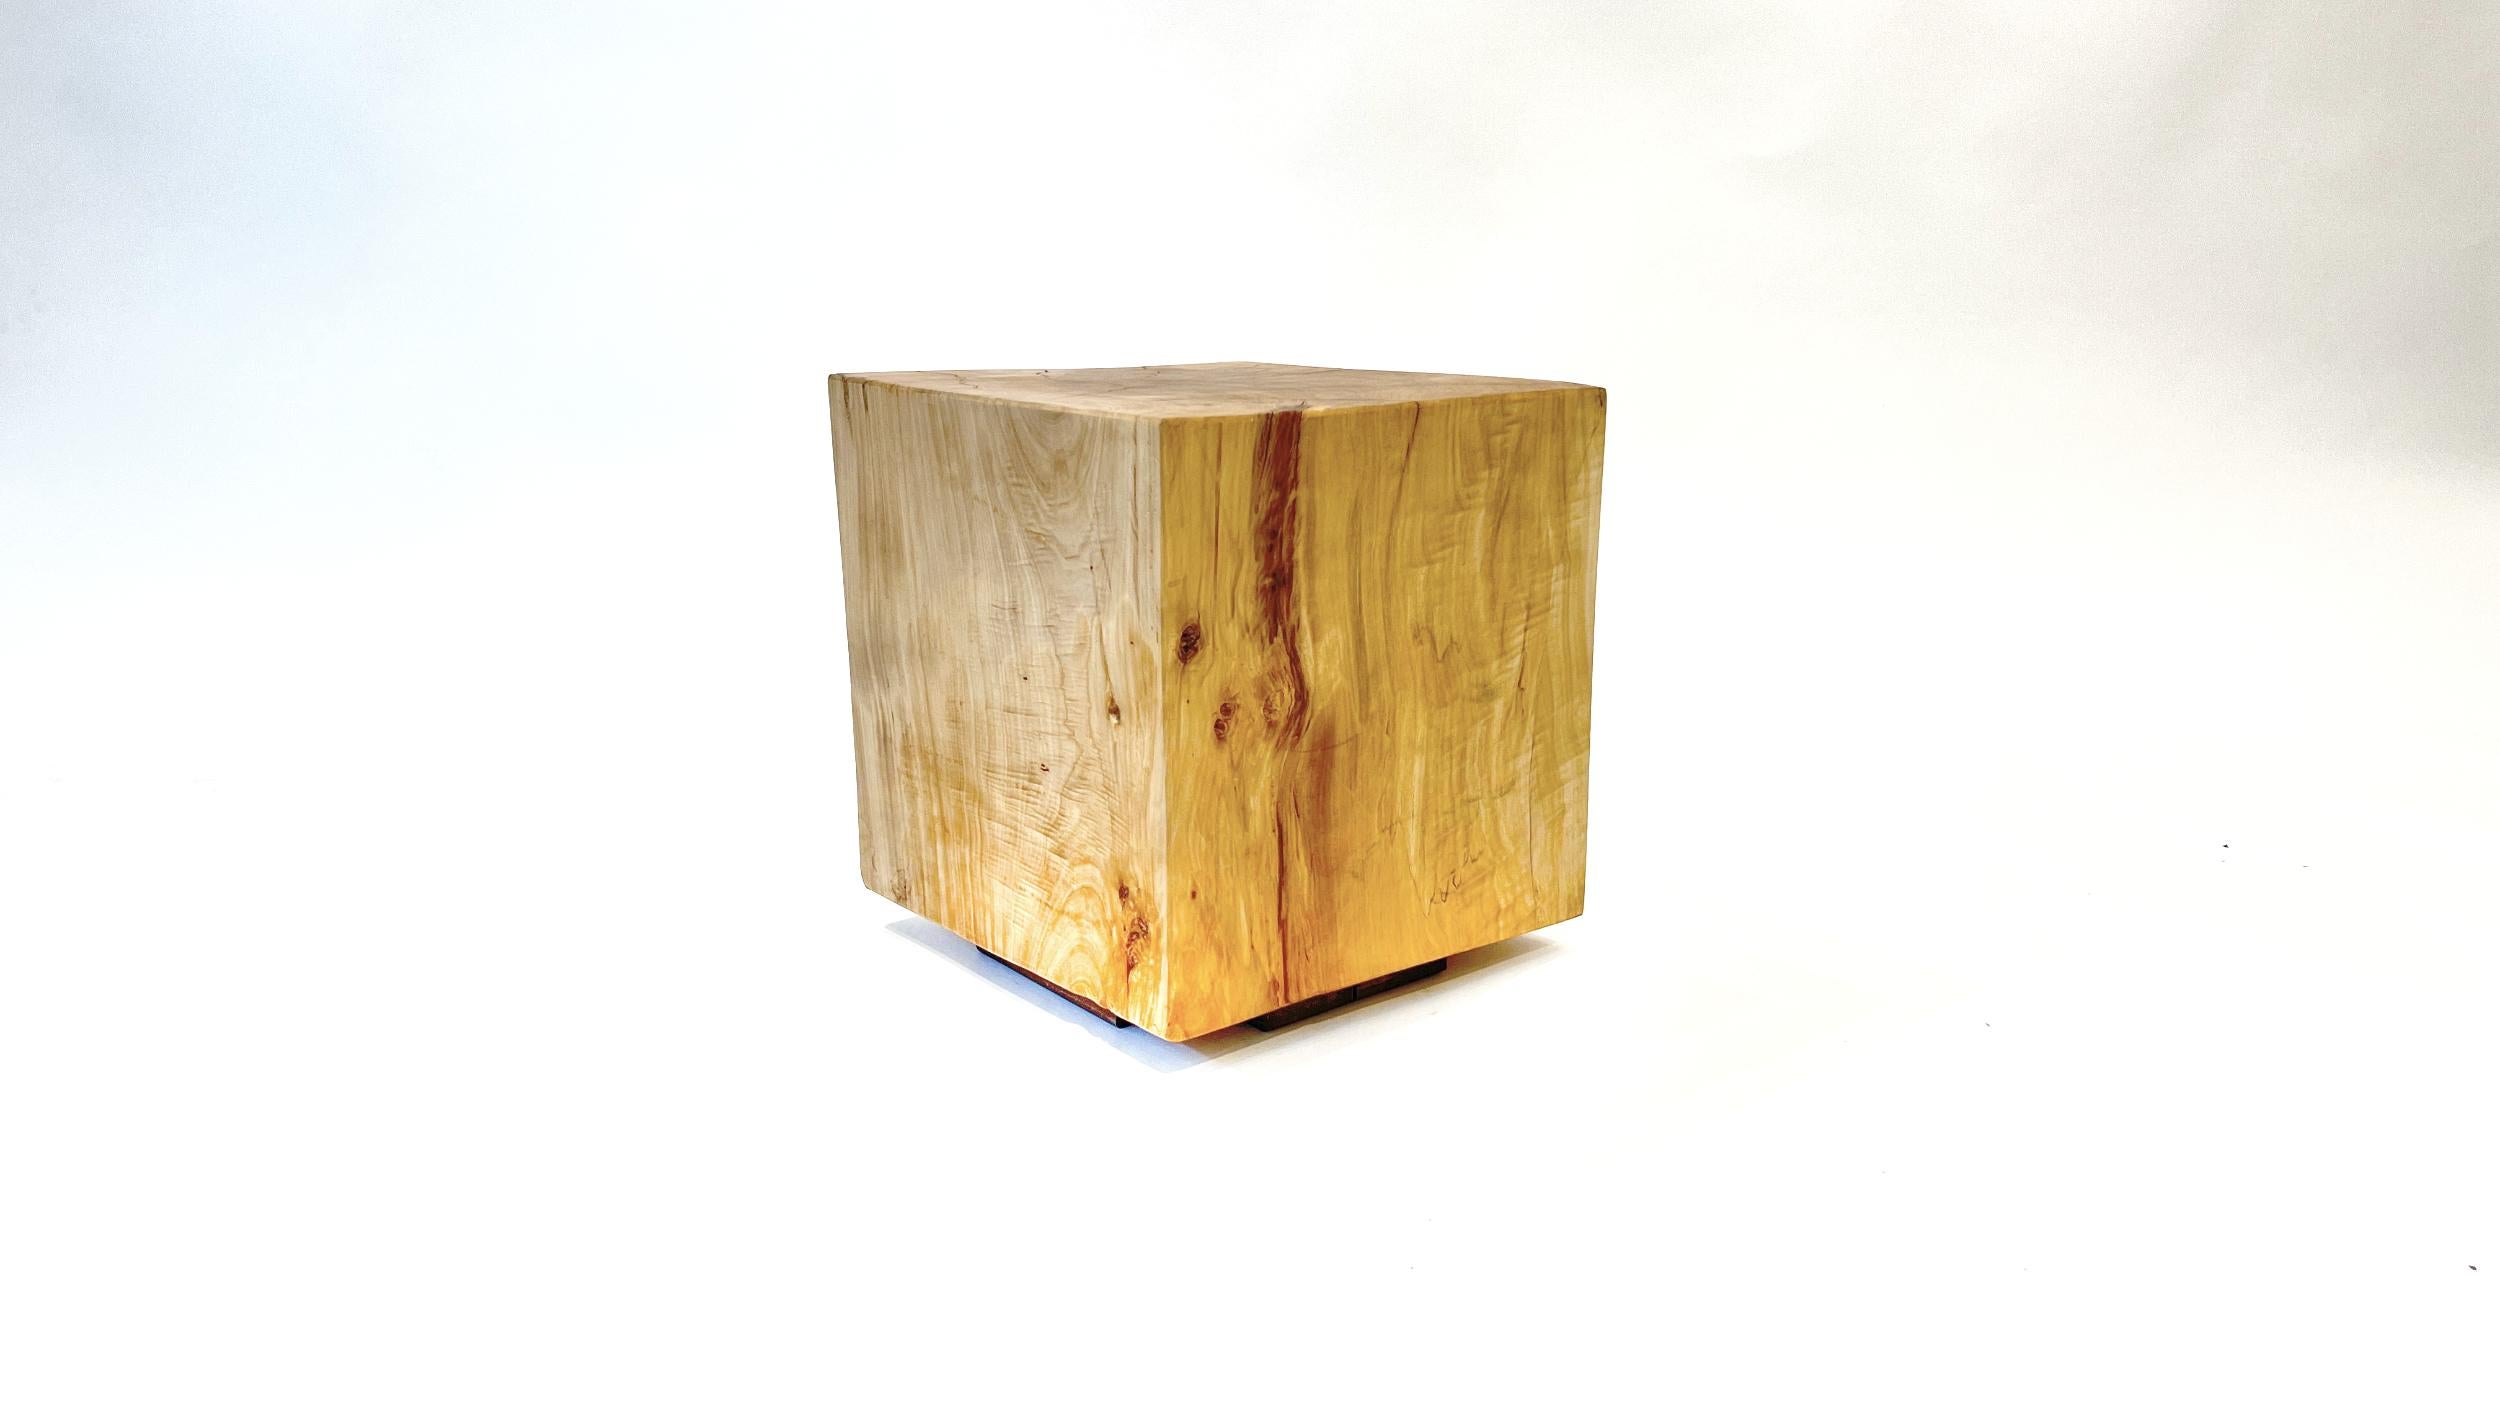 Bad Cube has been with us for years as we let it dry out in our shop. Initially a tree stump with chainsaw scars, we extracted the Milkyway inside to a geometrical shape. This cube is not perfect but it will make for a great stand, seat, or side